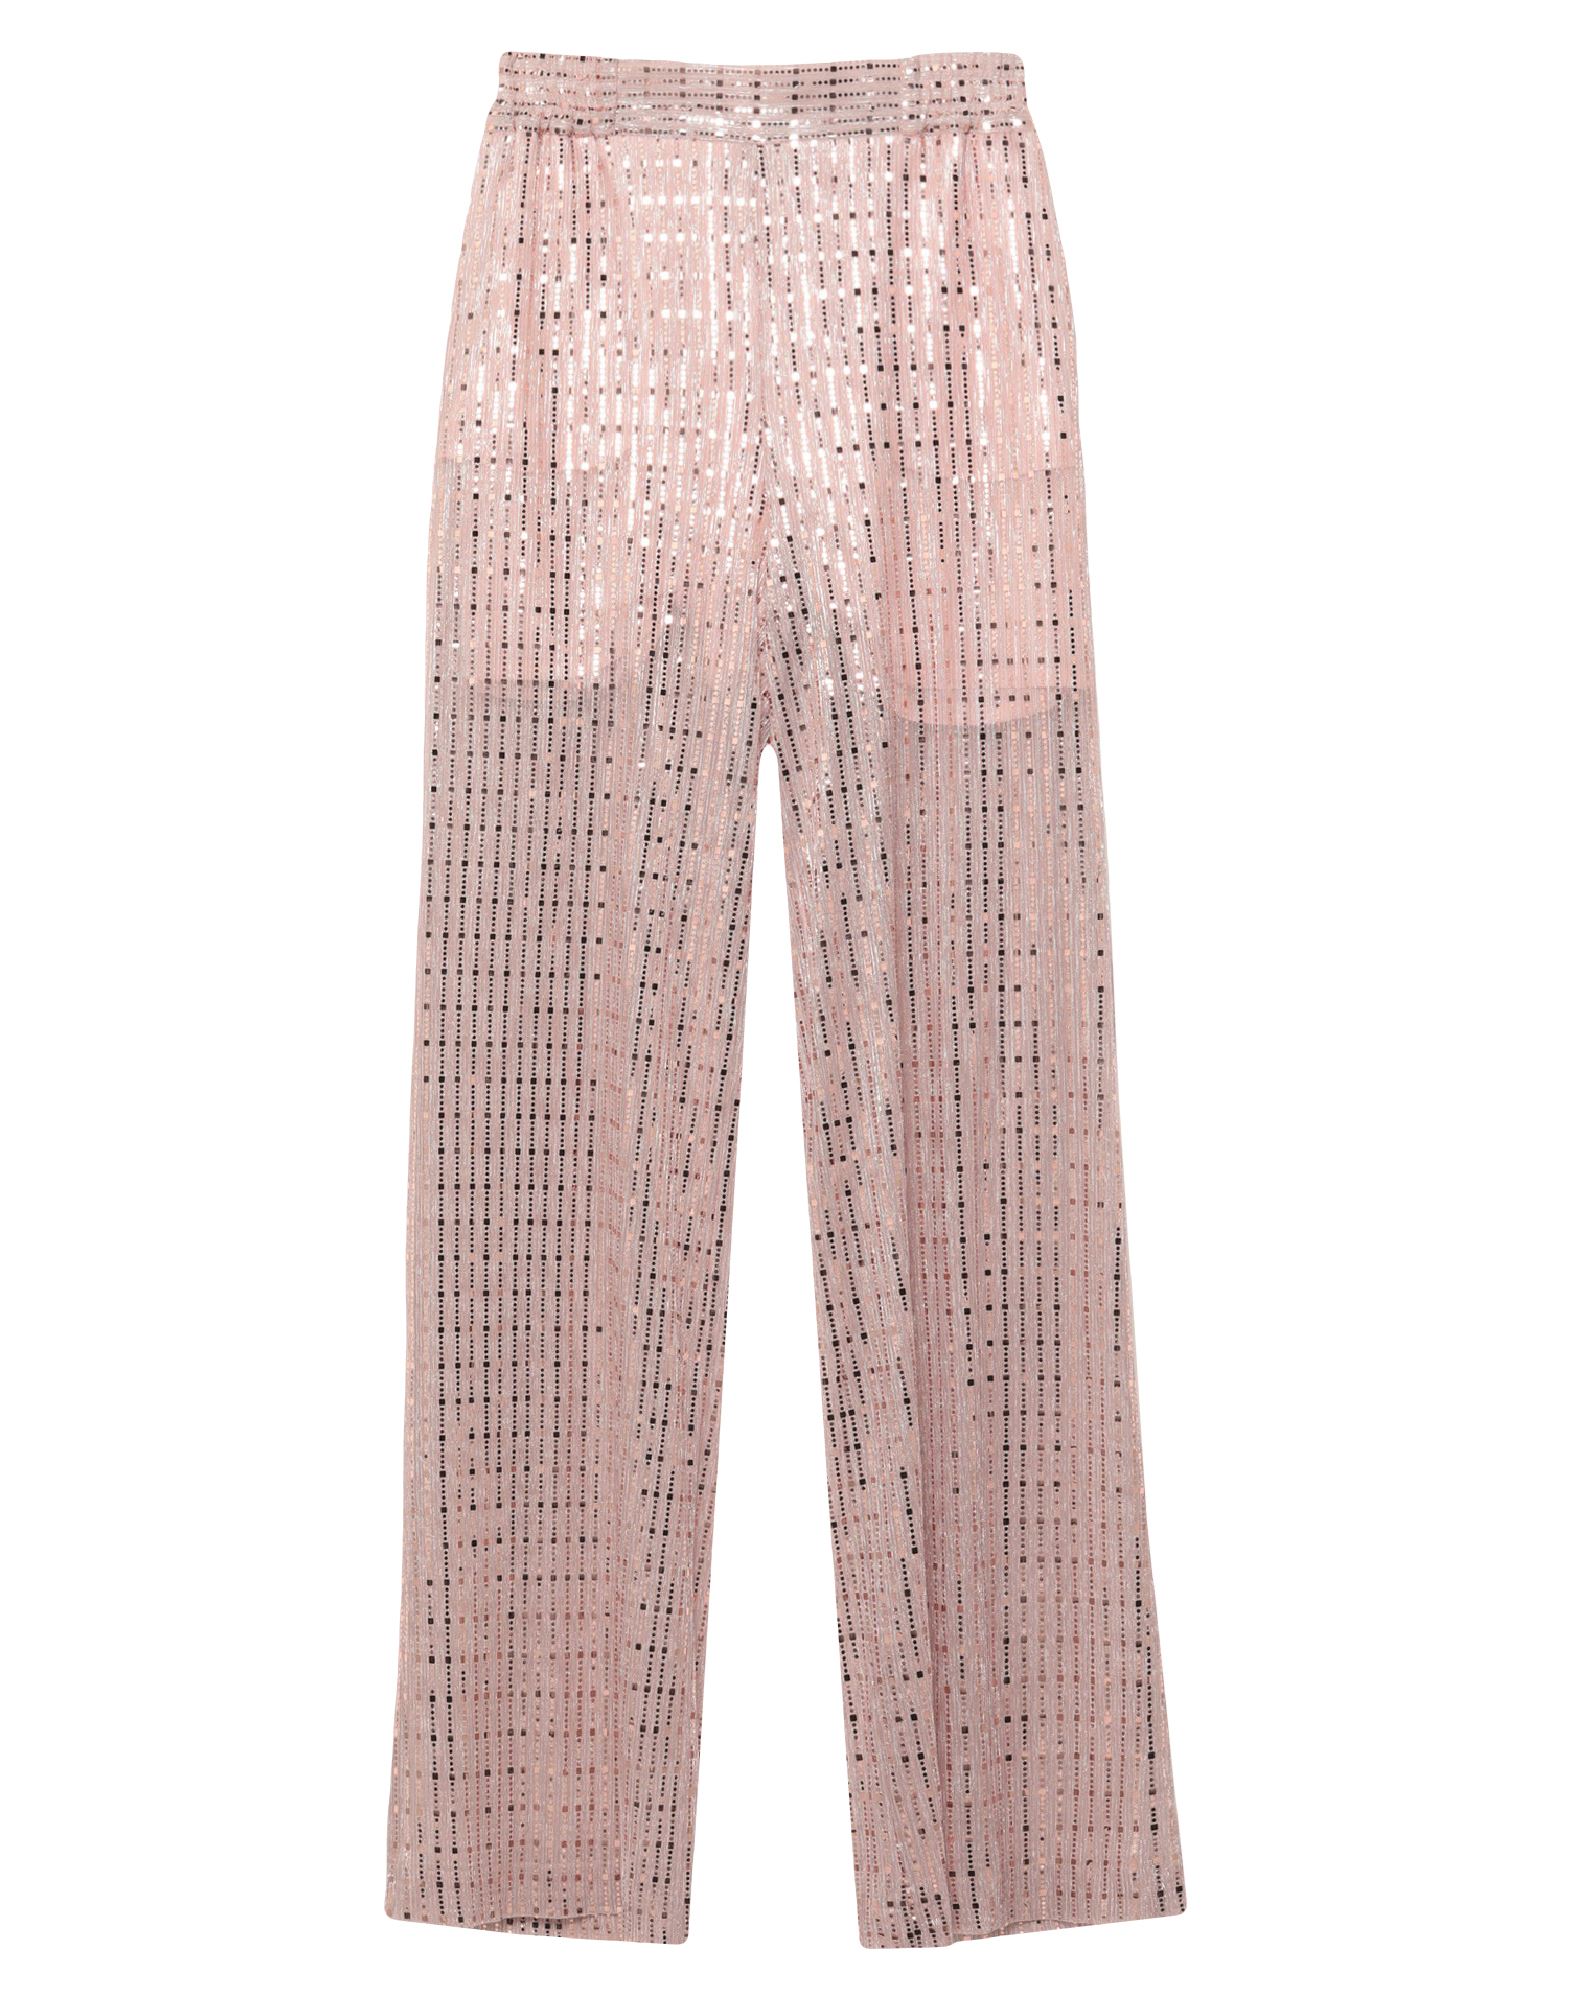 Alessandro Dell'acqua Pants In Light Pink